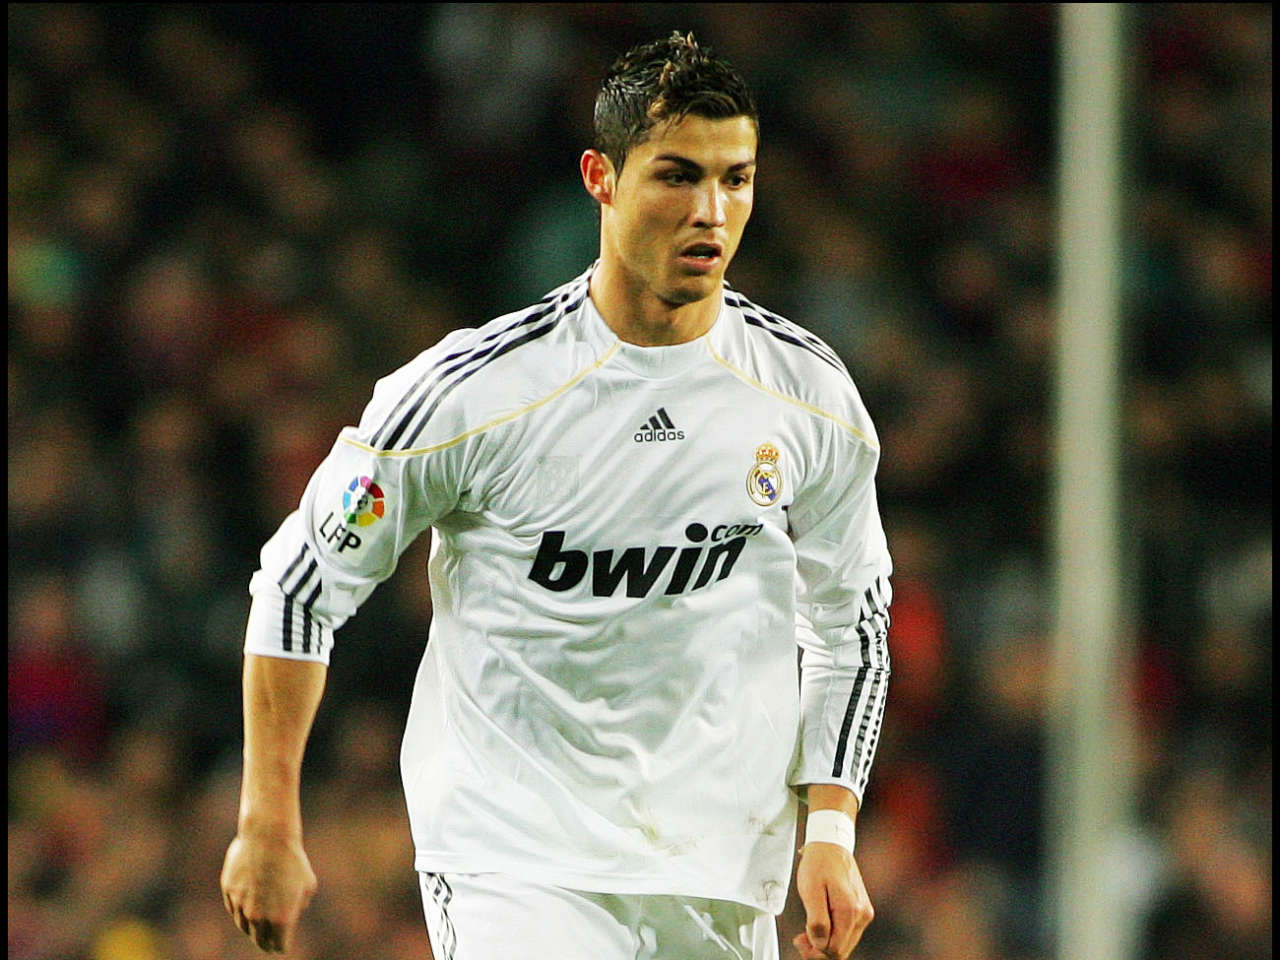 Chinese club offered Real Madrid €300m for Cristiano Ronaldo